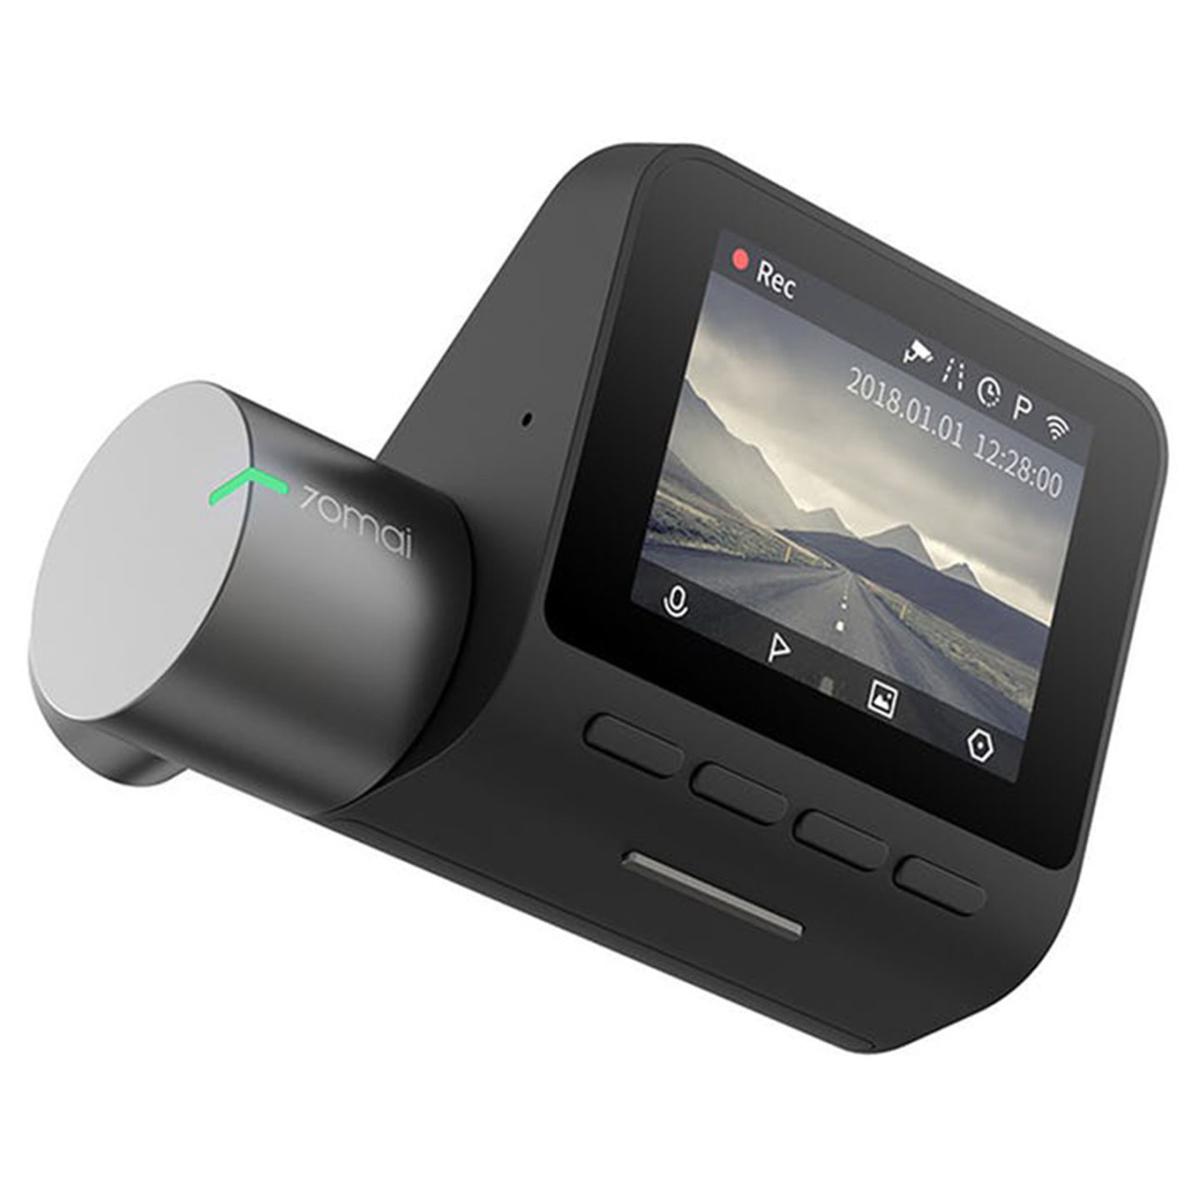 Tech review: 70mai Dash Cam Pro is always watching the ...